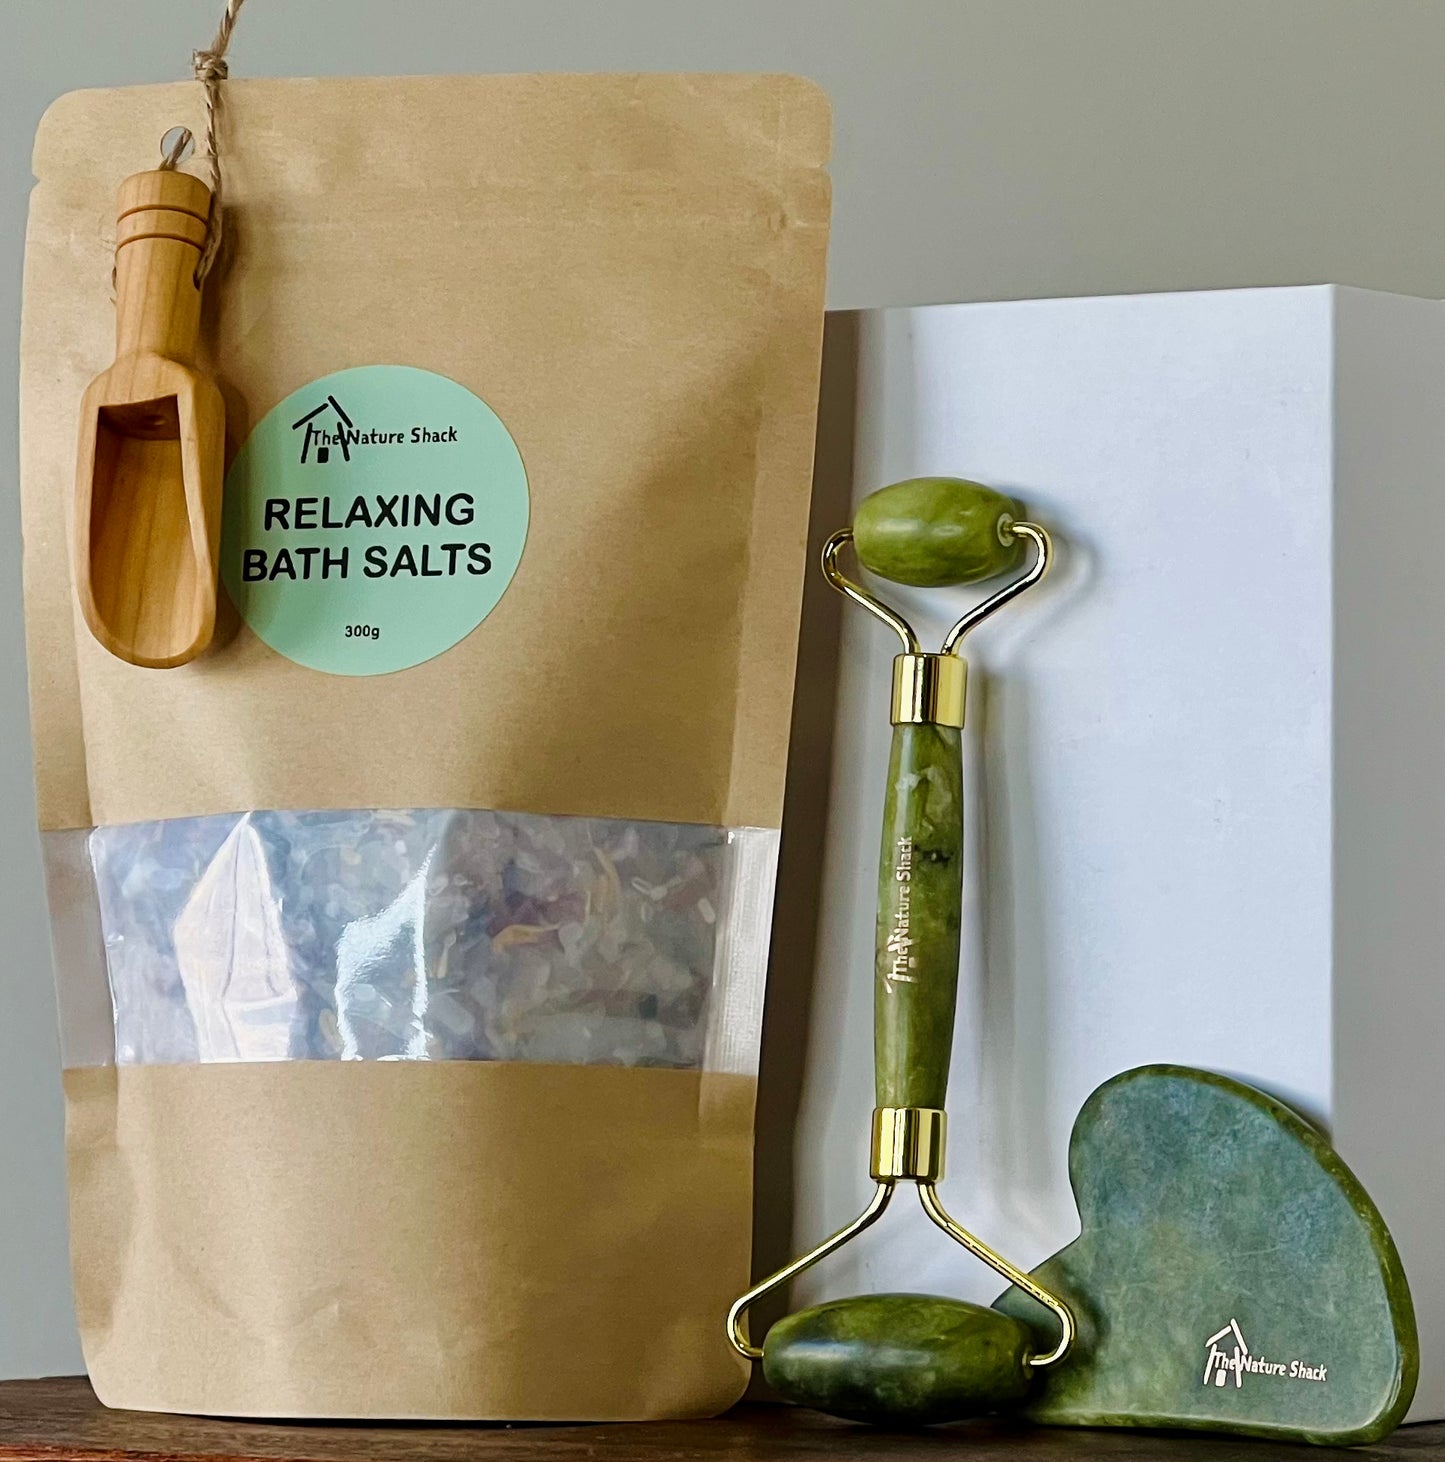 Mother's Day Bundle - Relaxing Bath Salts and Facial Massage Roller